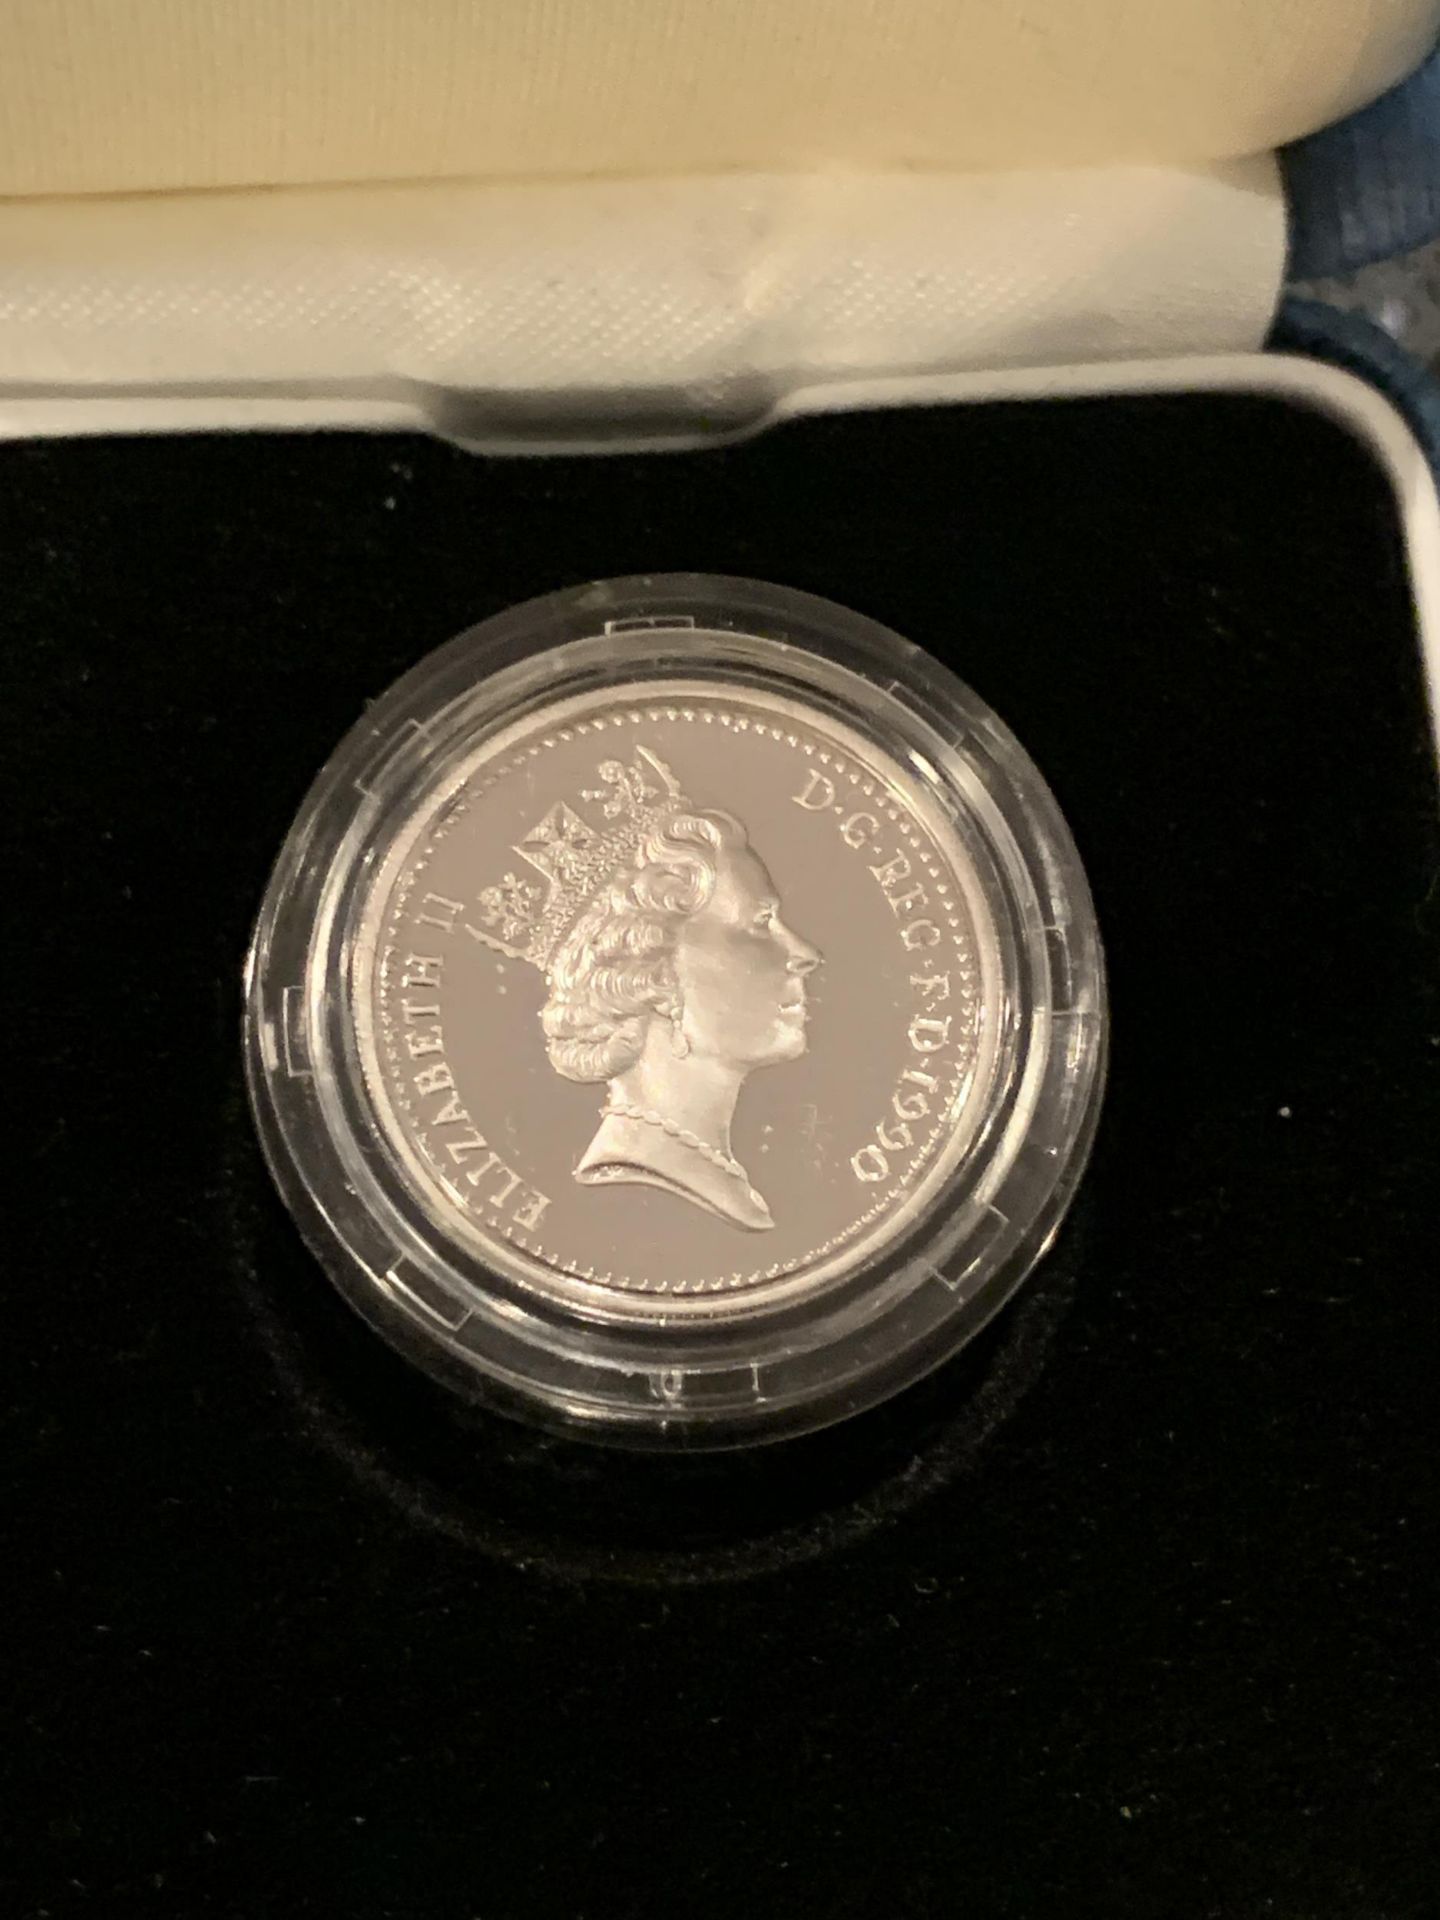 UK , CASED 1990 , ROYAL MINT , “LEEK IN CROWN” , SILVER PROOF ONE POUND COIN , ENCAPSULATED , WITH - Image 4 of 4